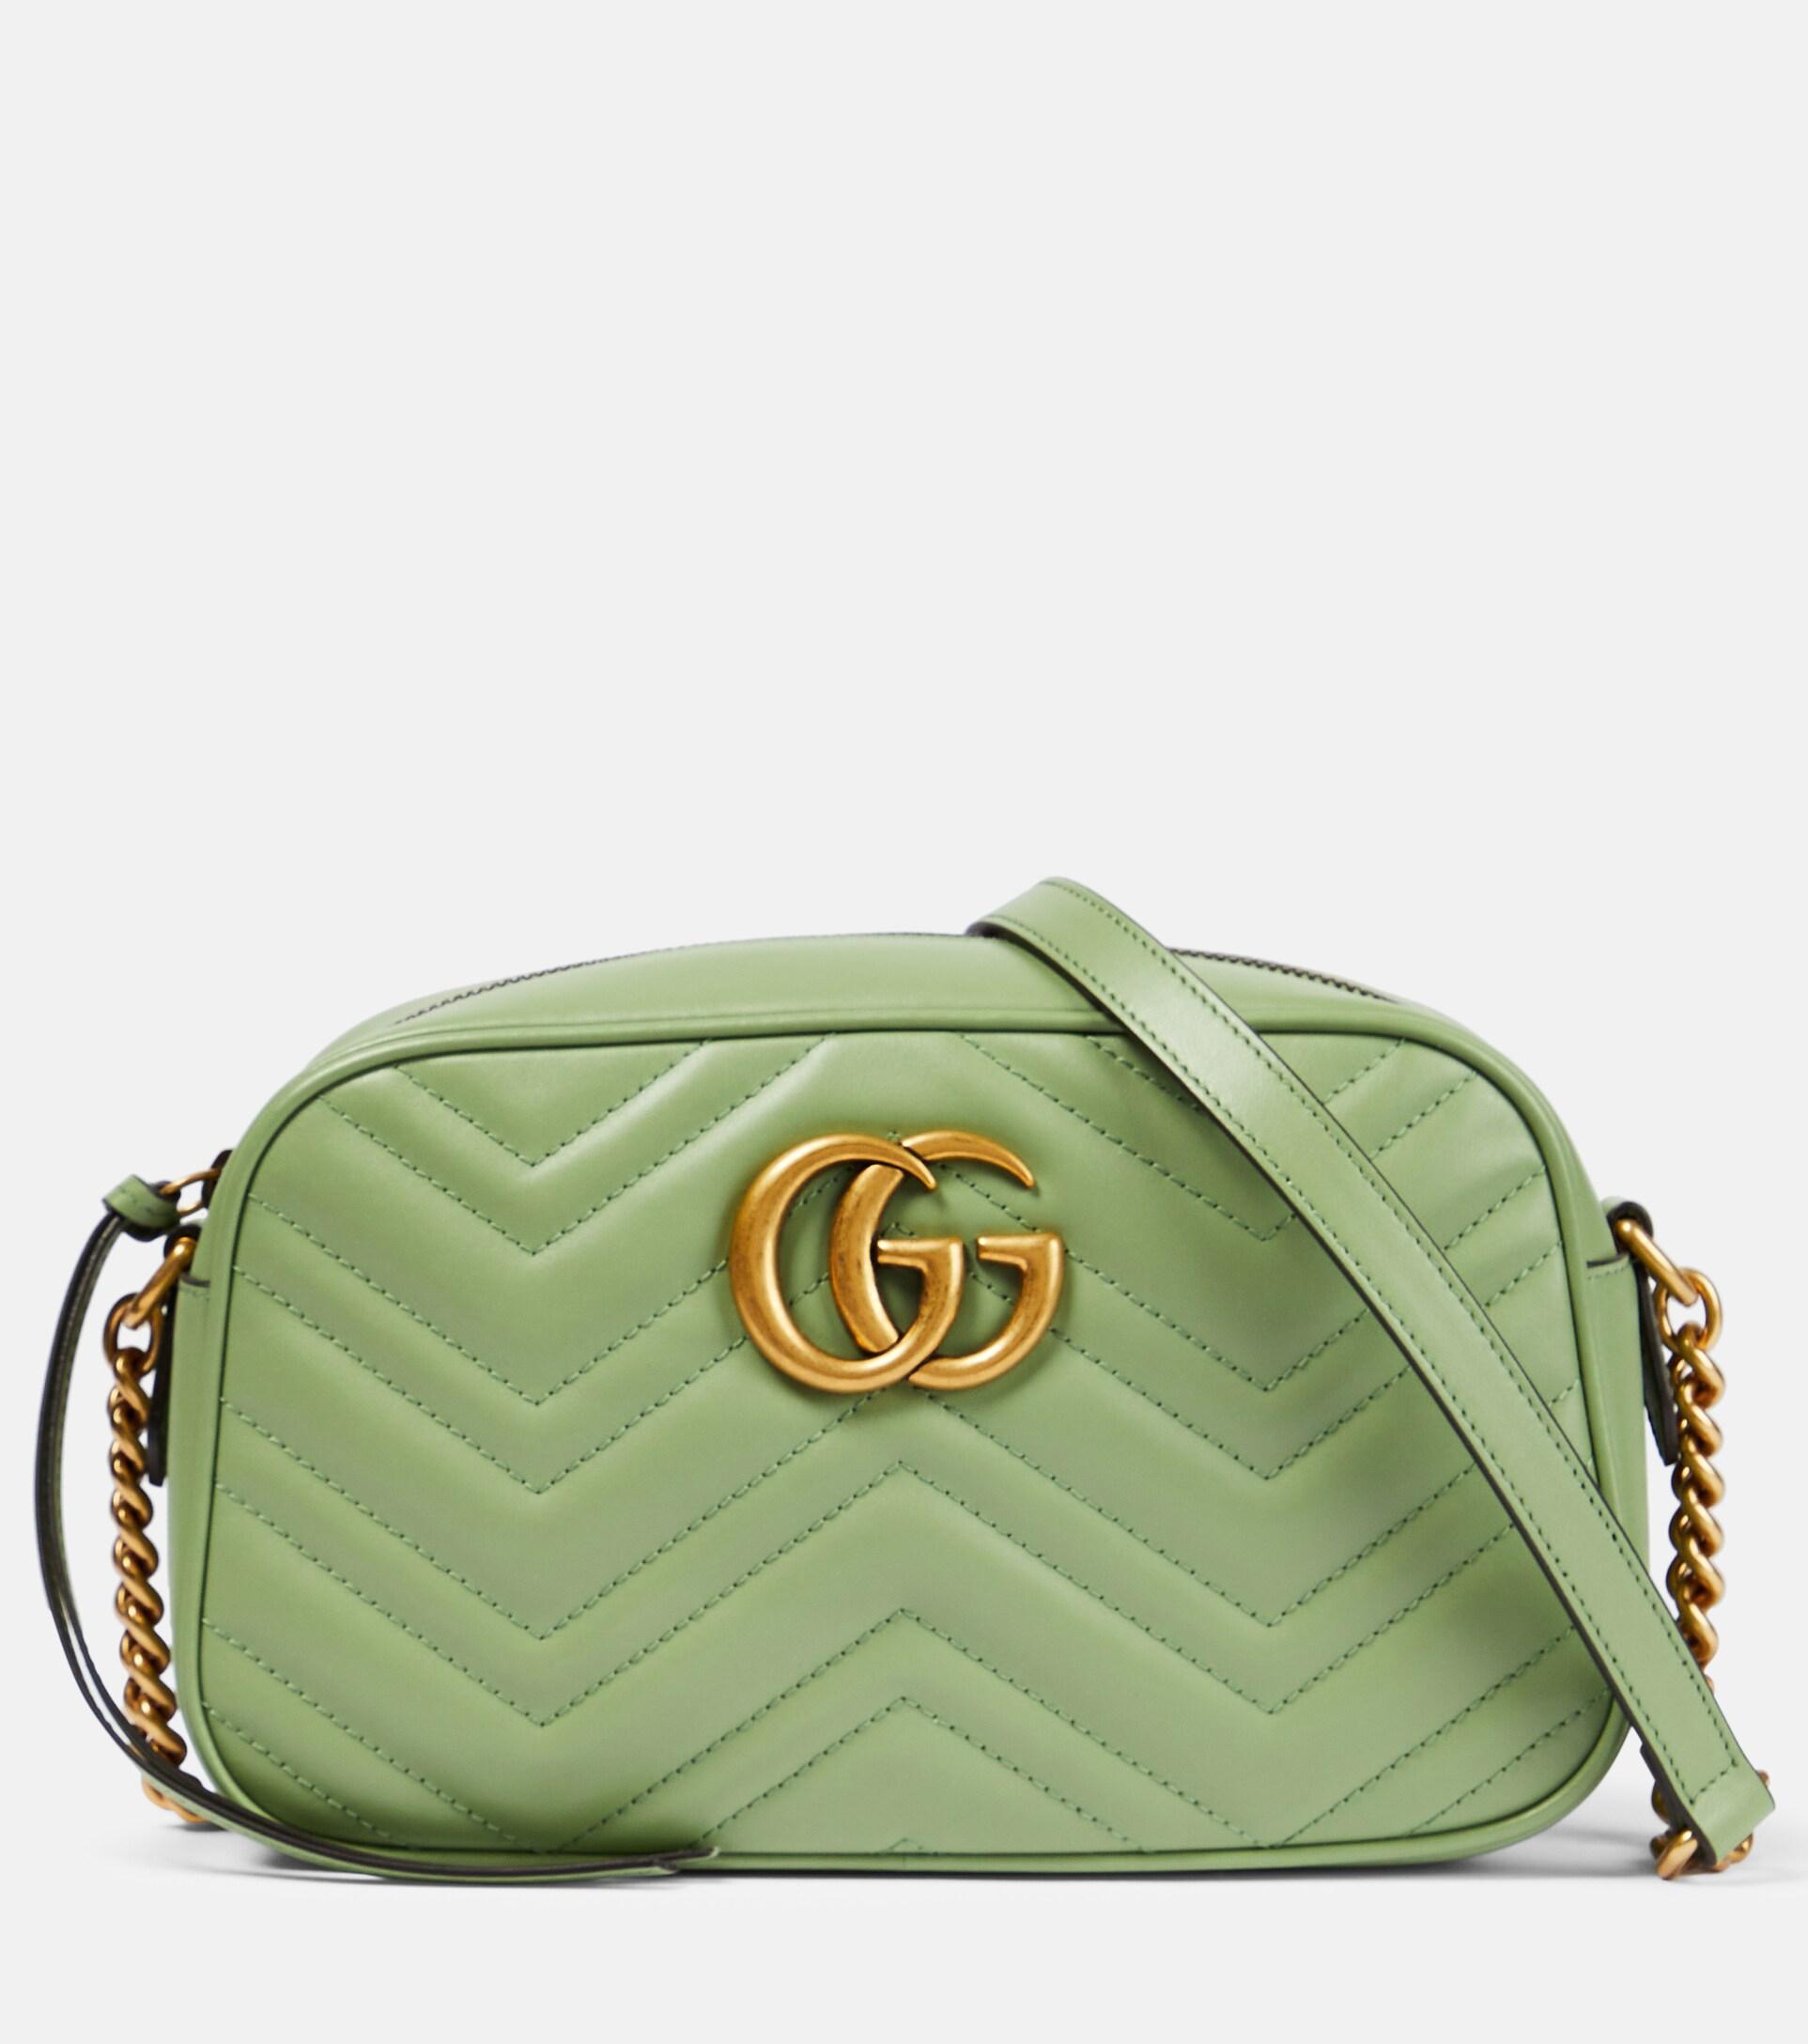 Gucci, Bags, Authentic Gucci Gg Marmont Vertical Phone Crossbody Bag  Matelasse Leather Mini